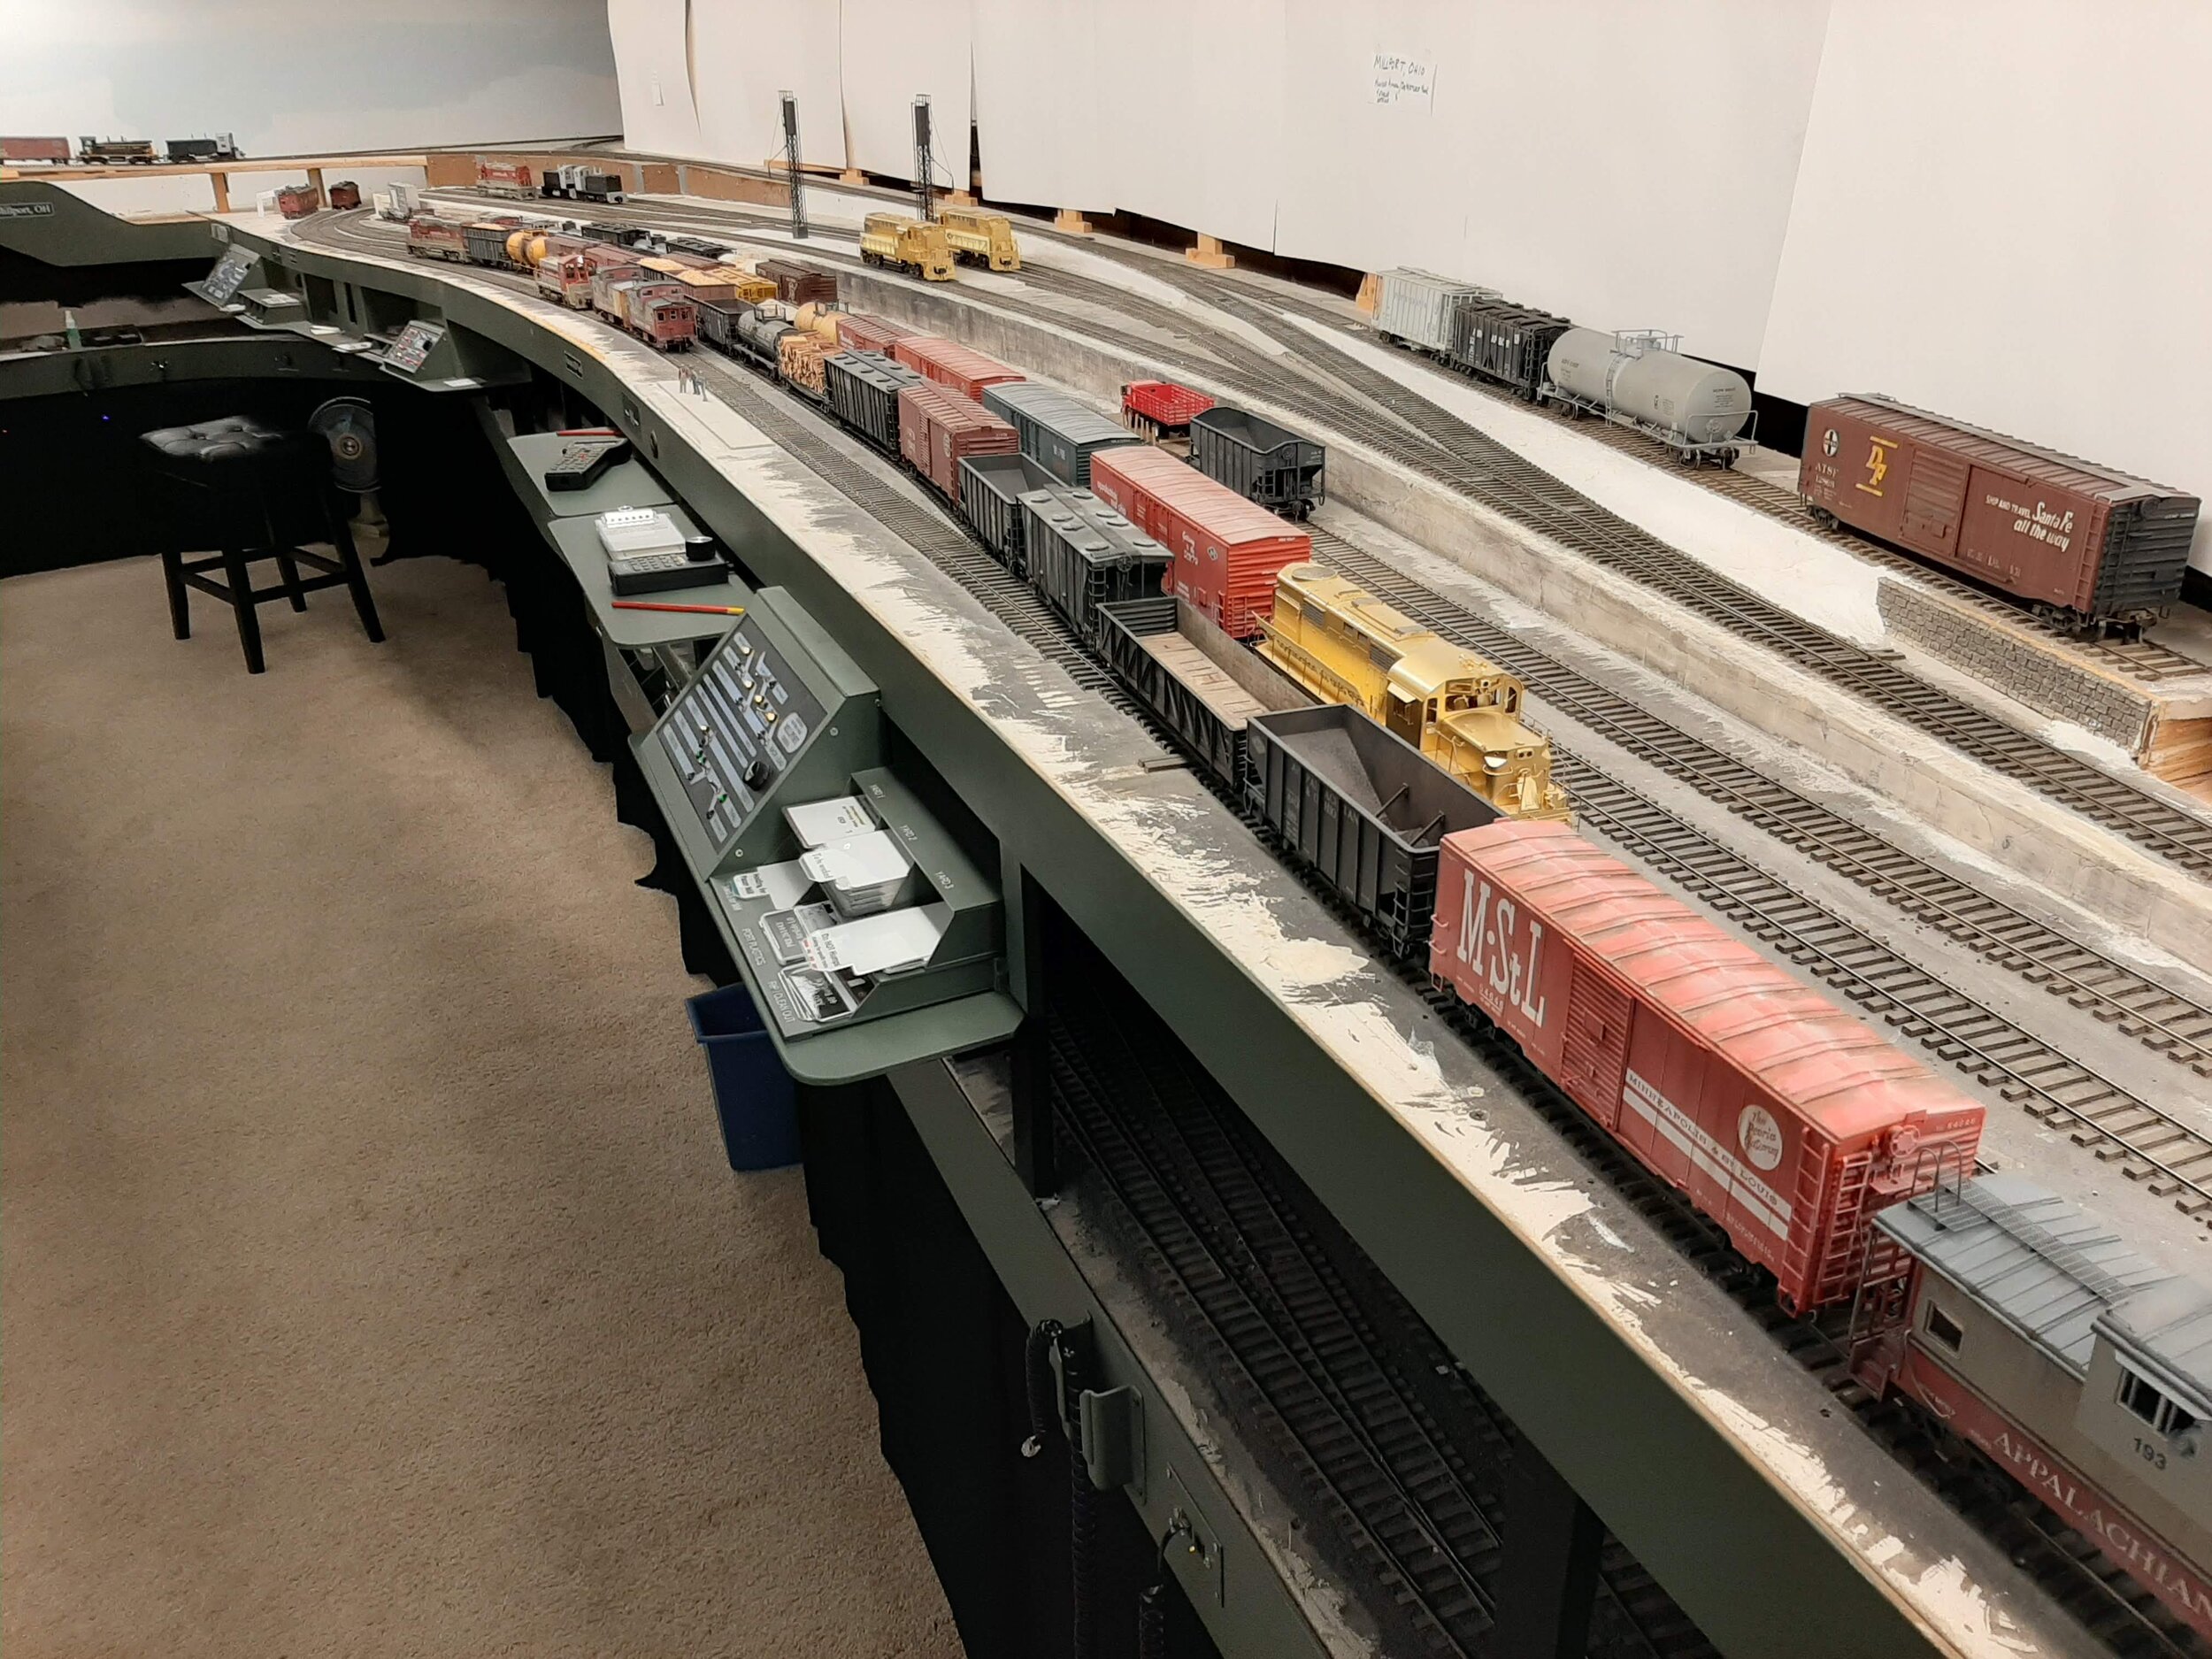  Some photos to flesh out Millport operator positions (can’t wait for the structures to arrive).  #262 has arrived and sits on the Thru track. Behind on Yard 1 is it’s opposite train, #261, running late, but ready to depart. The panel shelves and pul